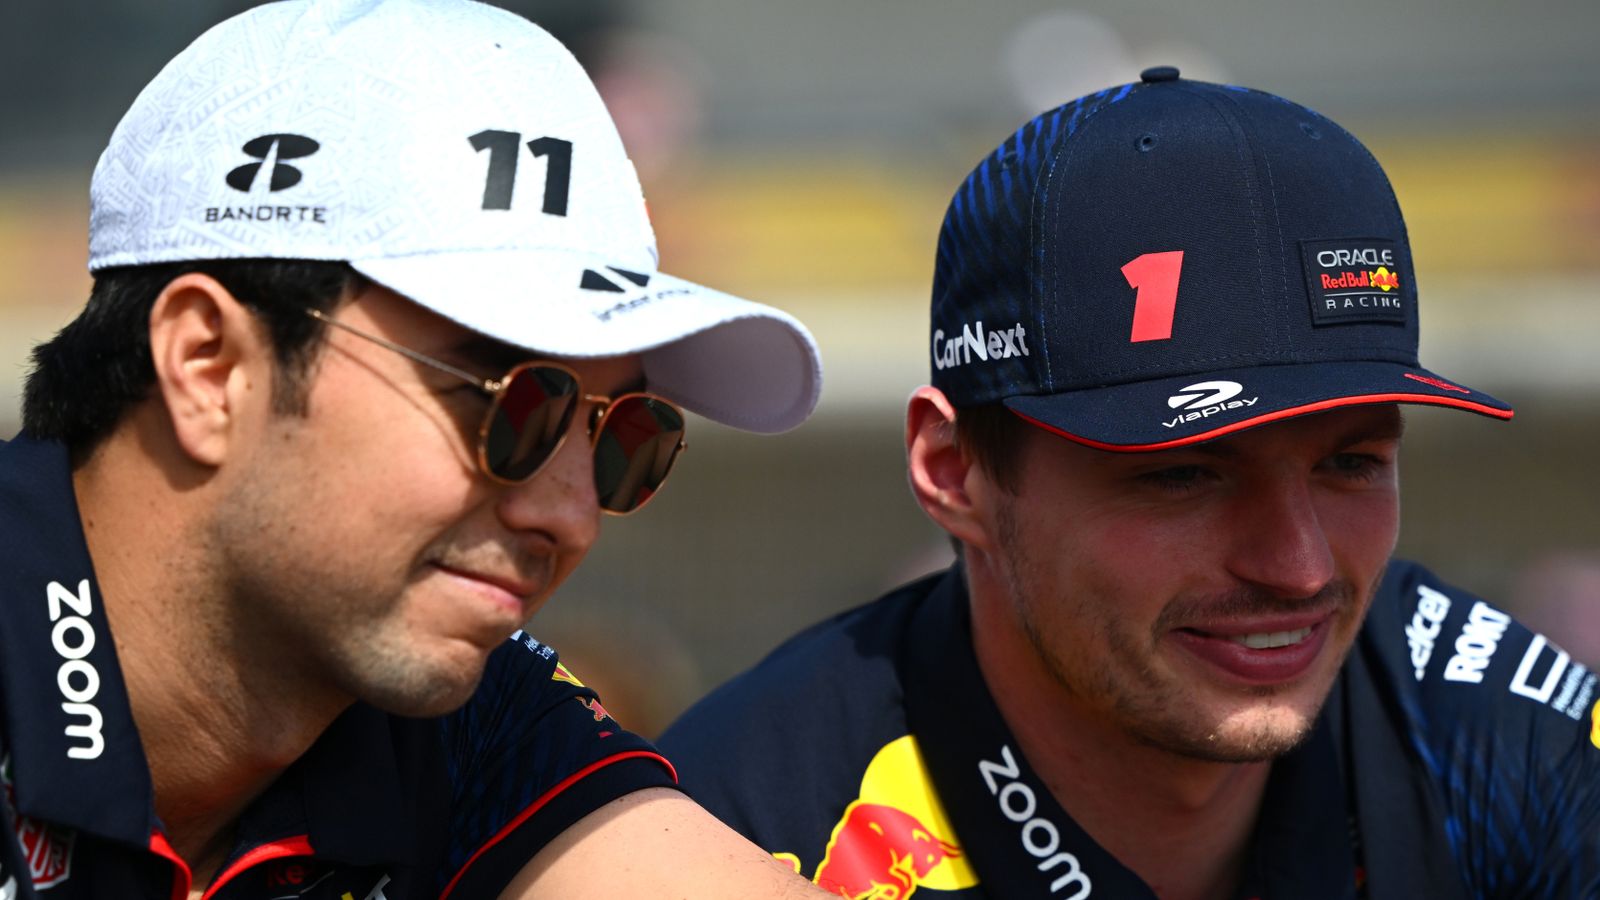 Mexico City GP: Red Bull’s Max Verstappen and Sergio Perez dismiss ‘rivalry’ amid concerns over hostility